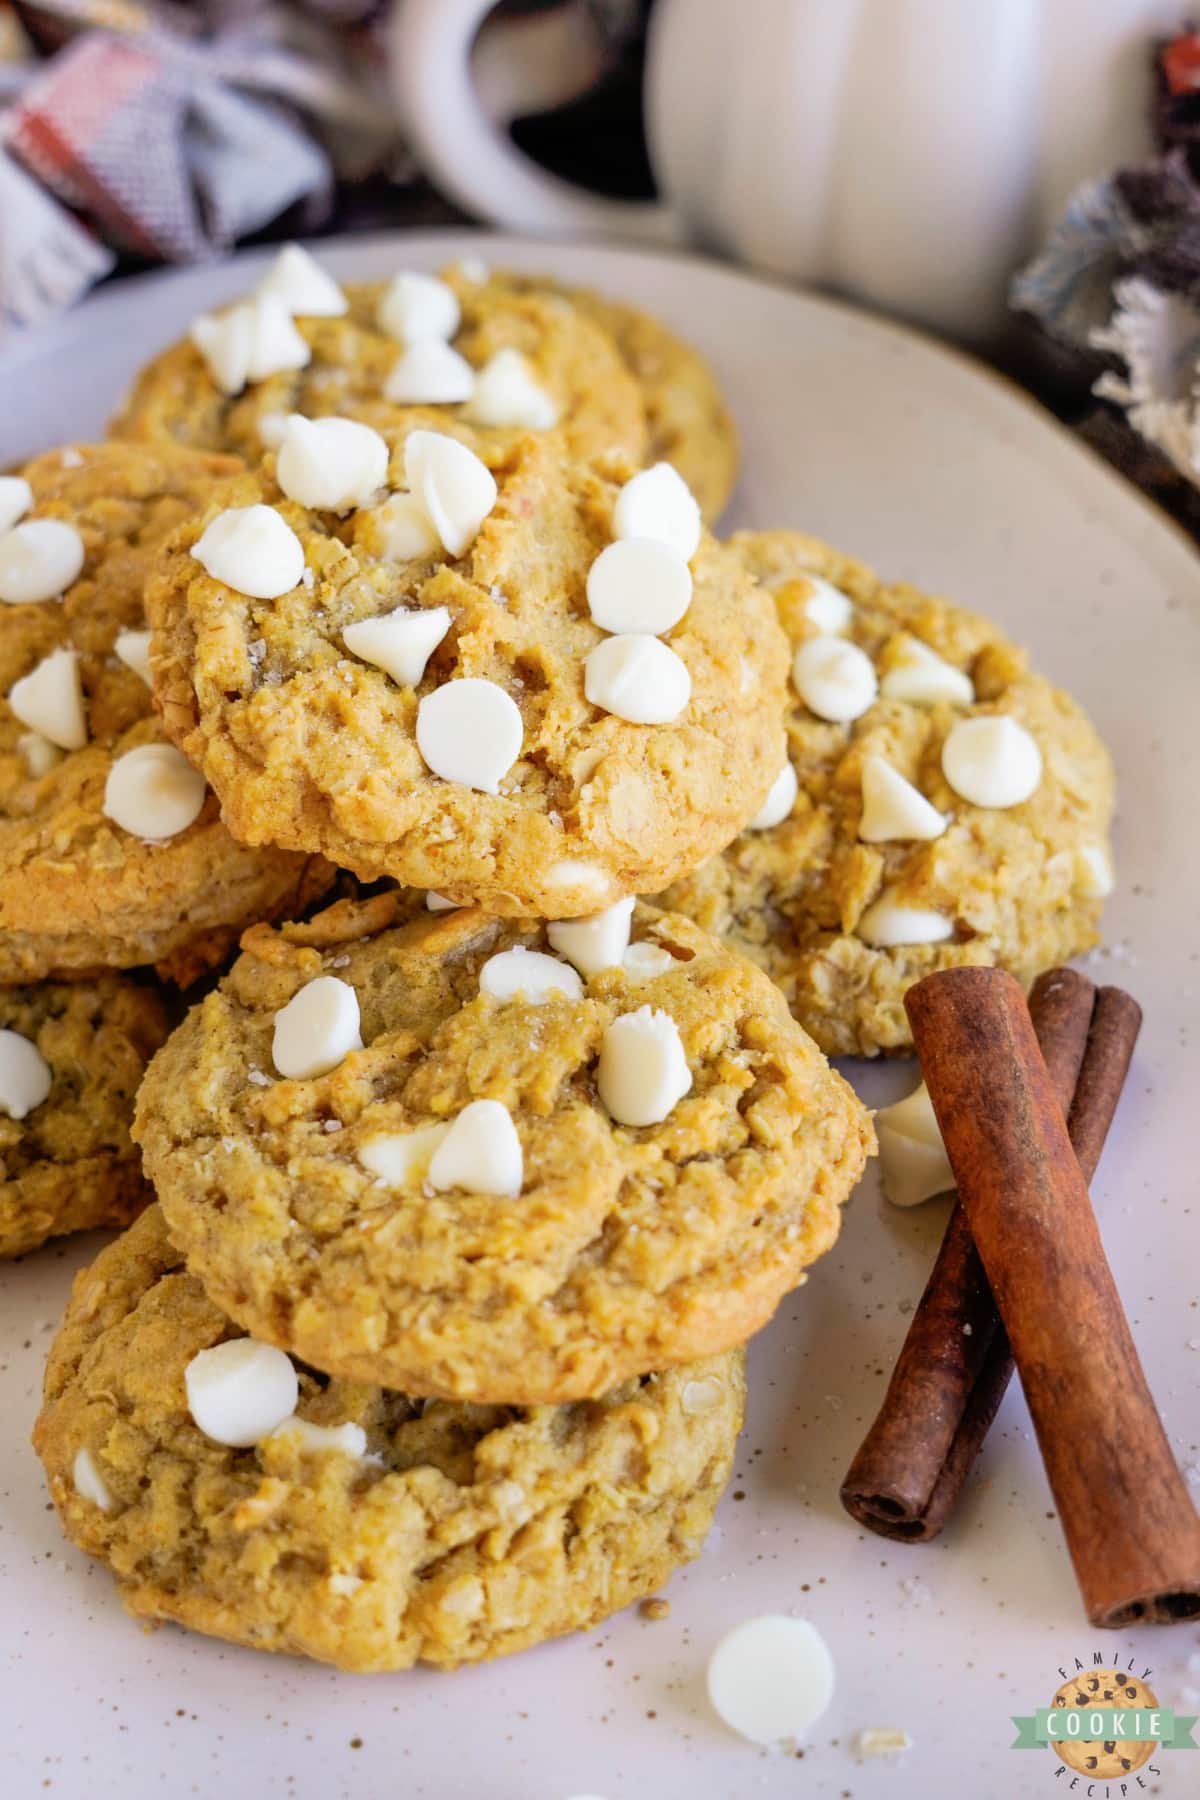 Plate of cookies made with oats, pumpkin and white chocolate chips.